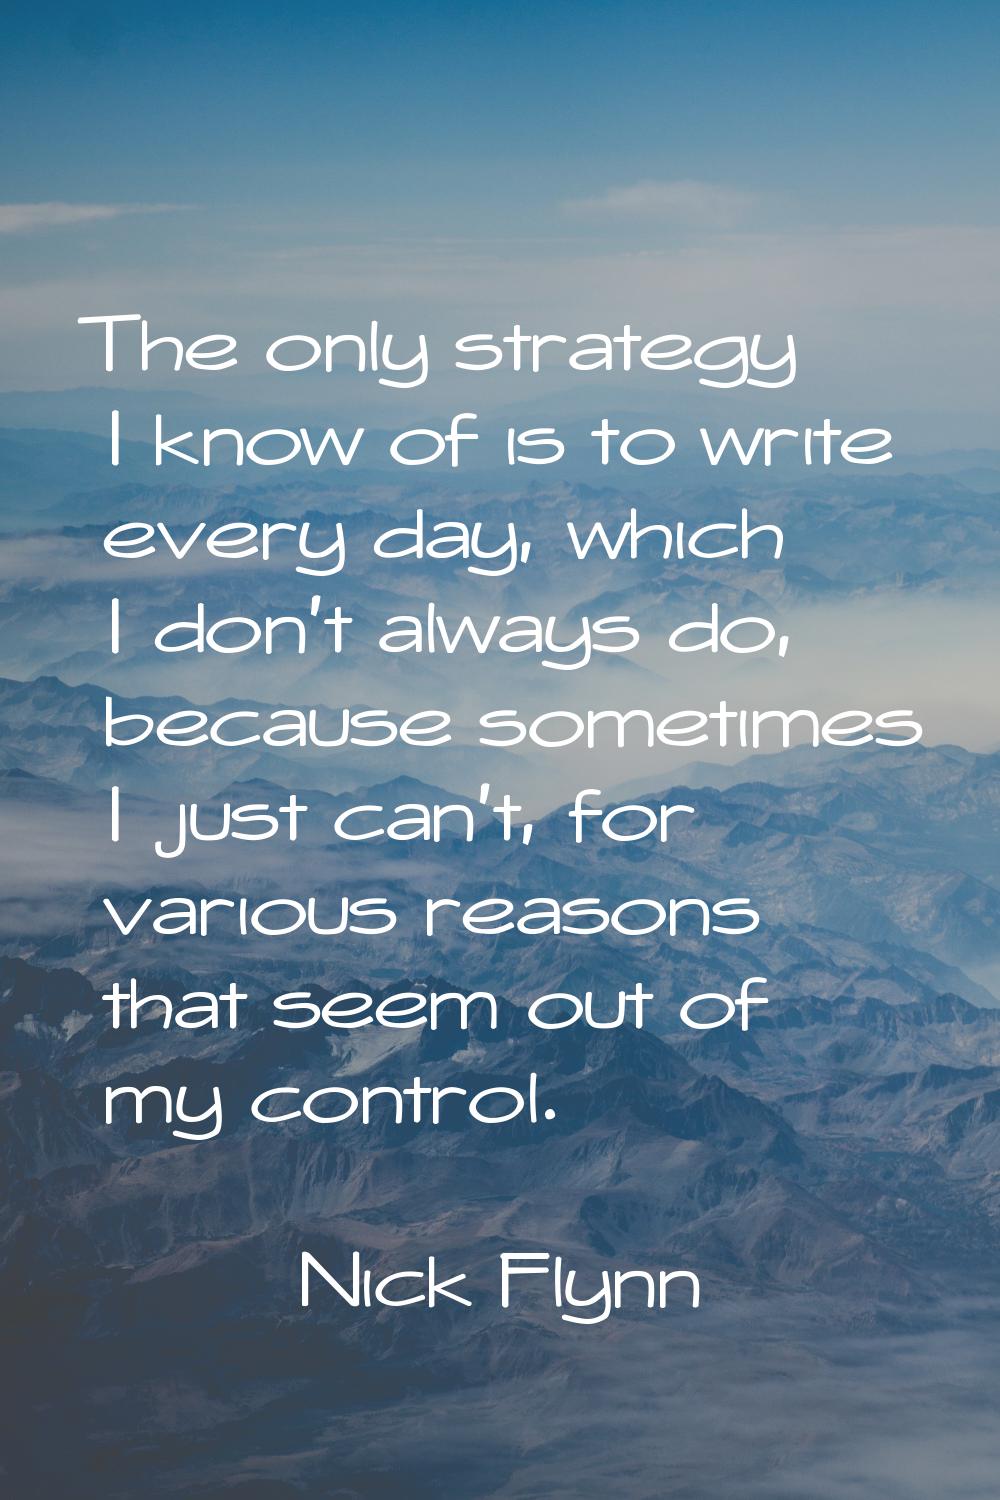 The only strategy I know of is to write every day, which I don't always do, because sometimes I jus